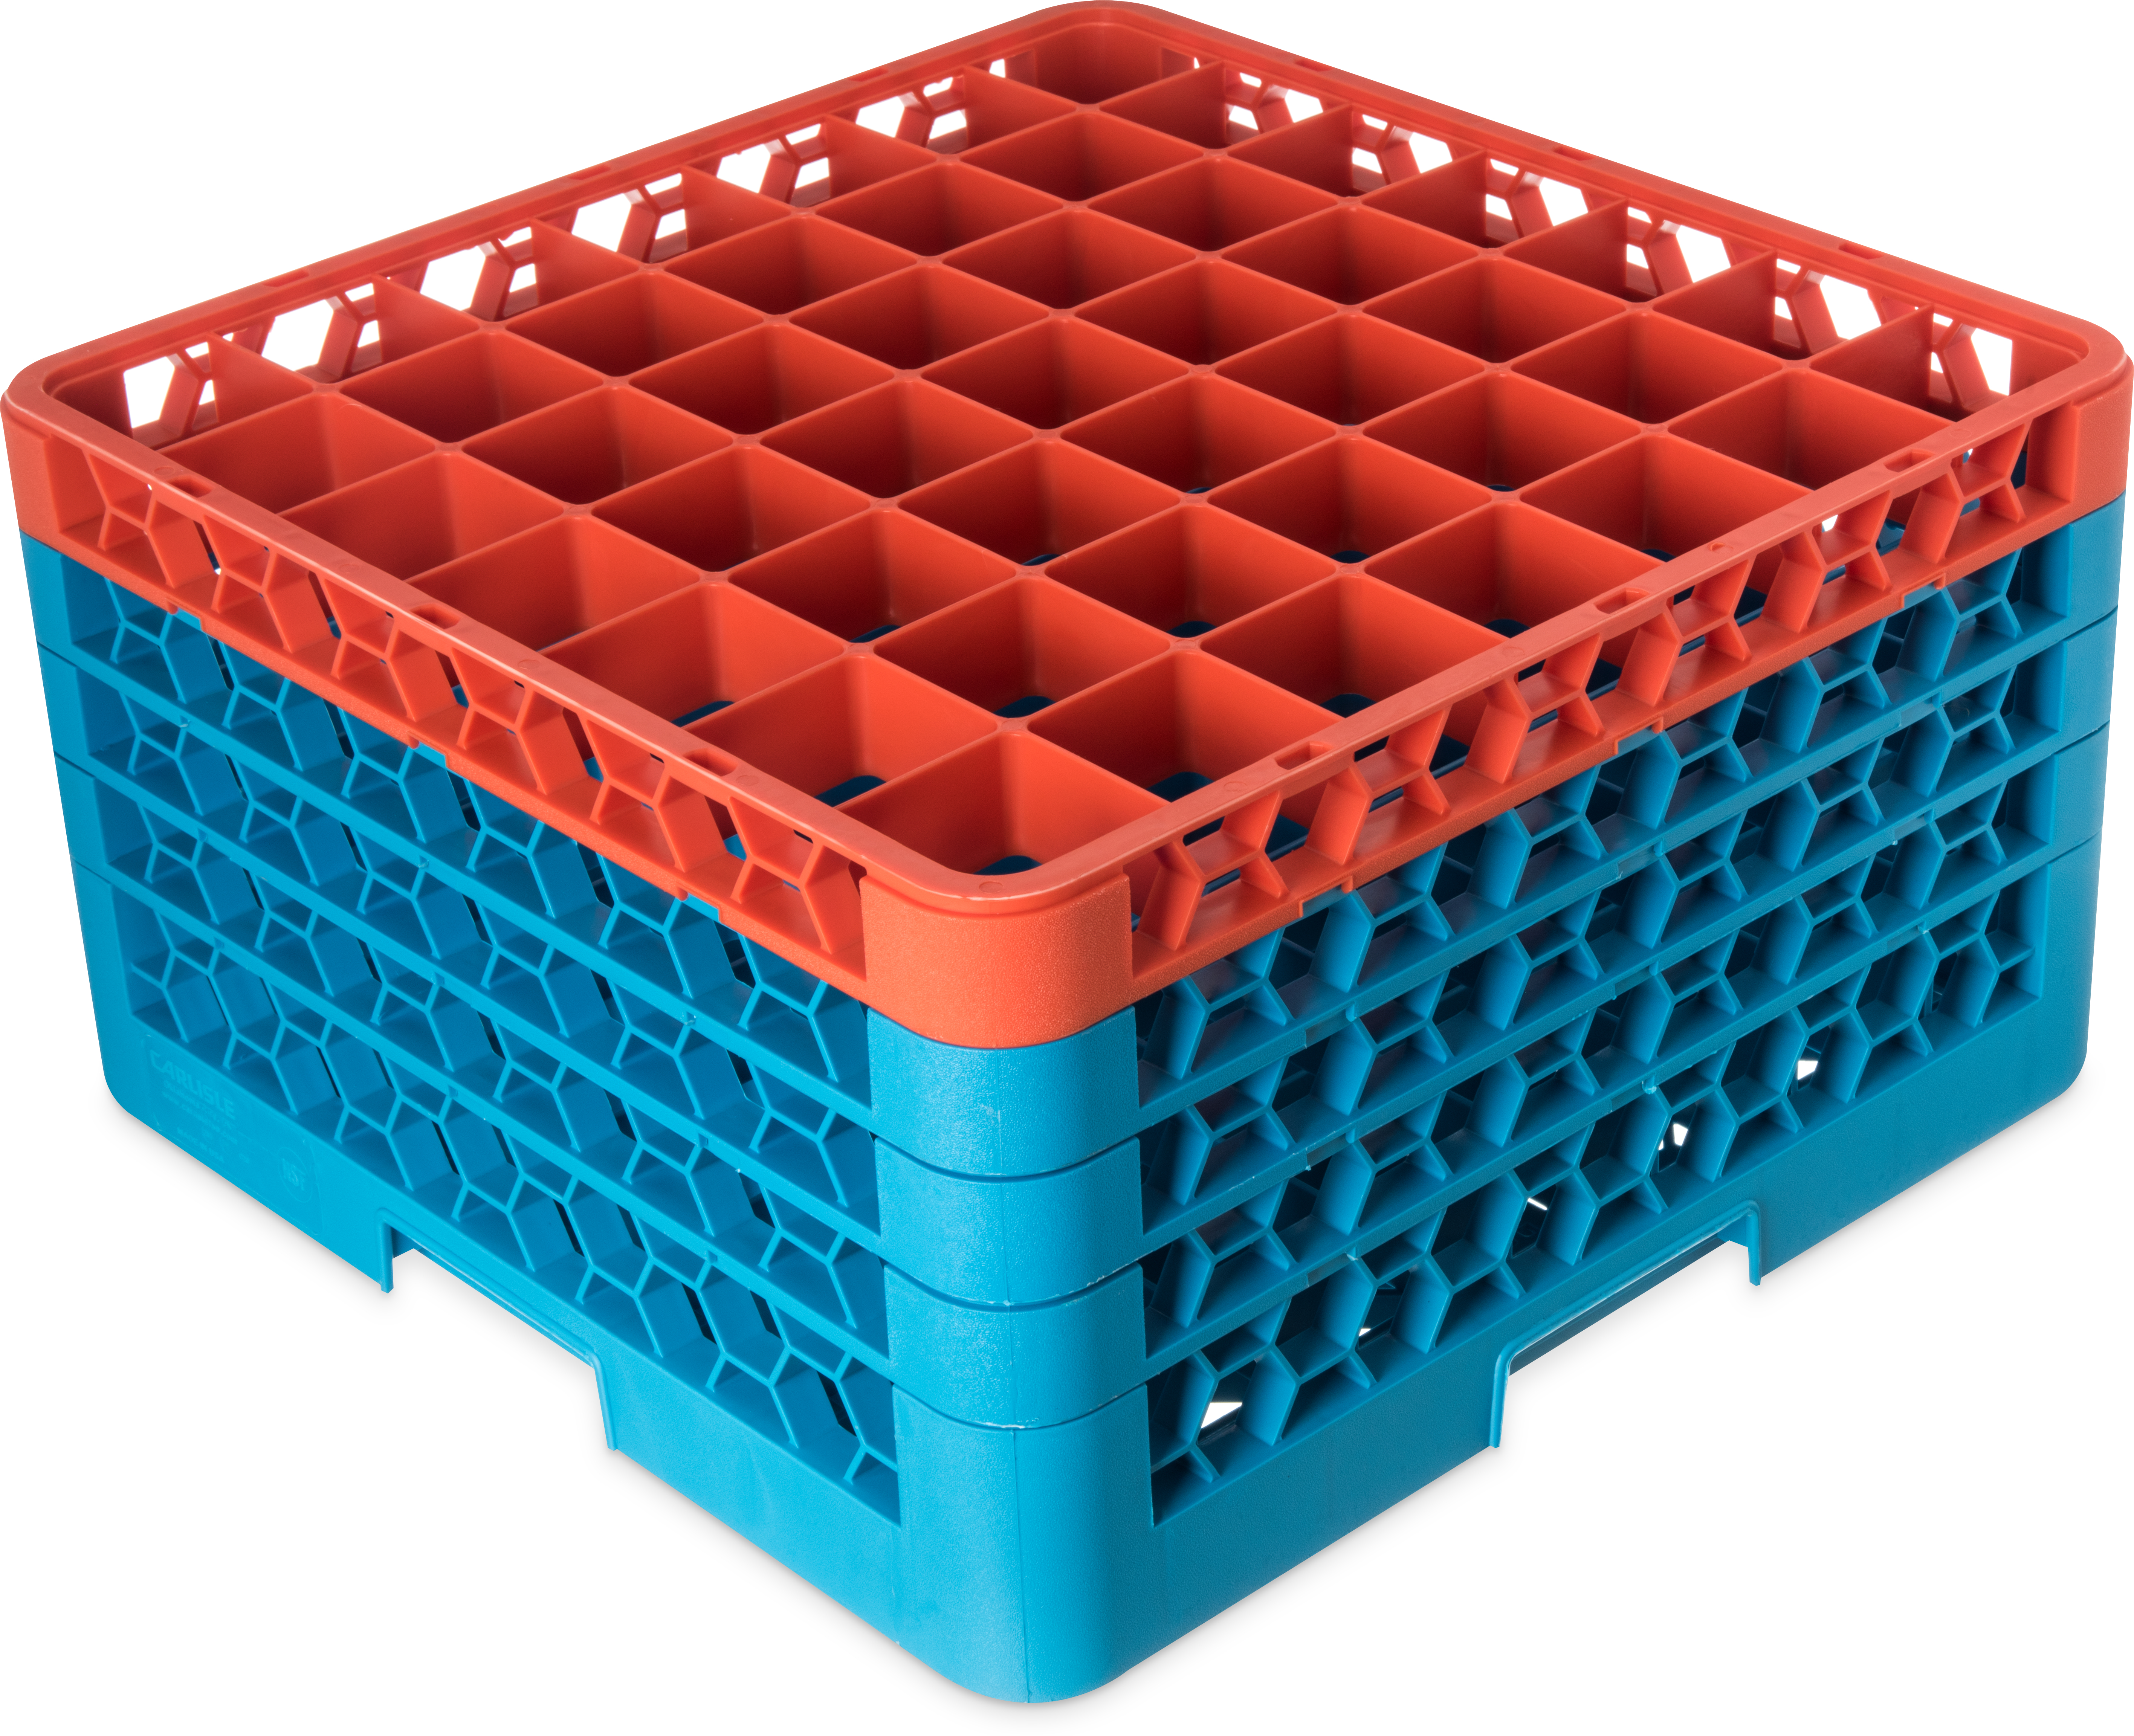 OptiClean 49 Compartment Glass Rack with 4 Extenders 10.3 - Orange-Carlisle Blue